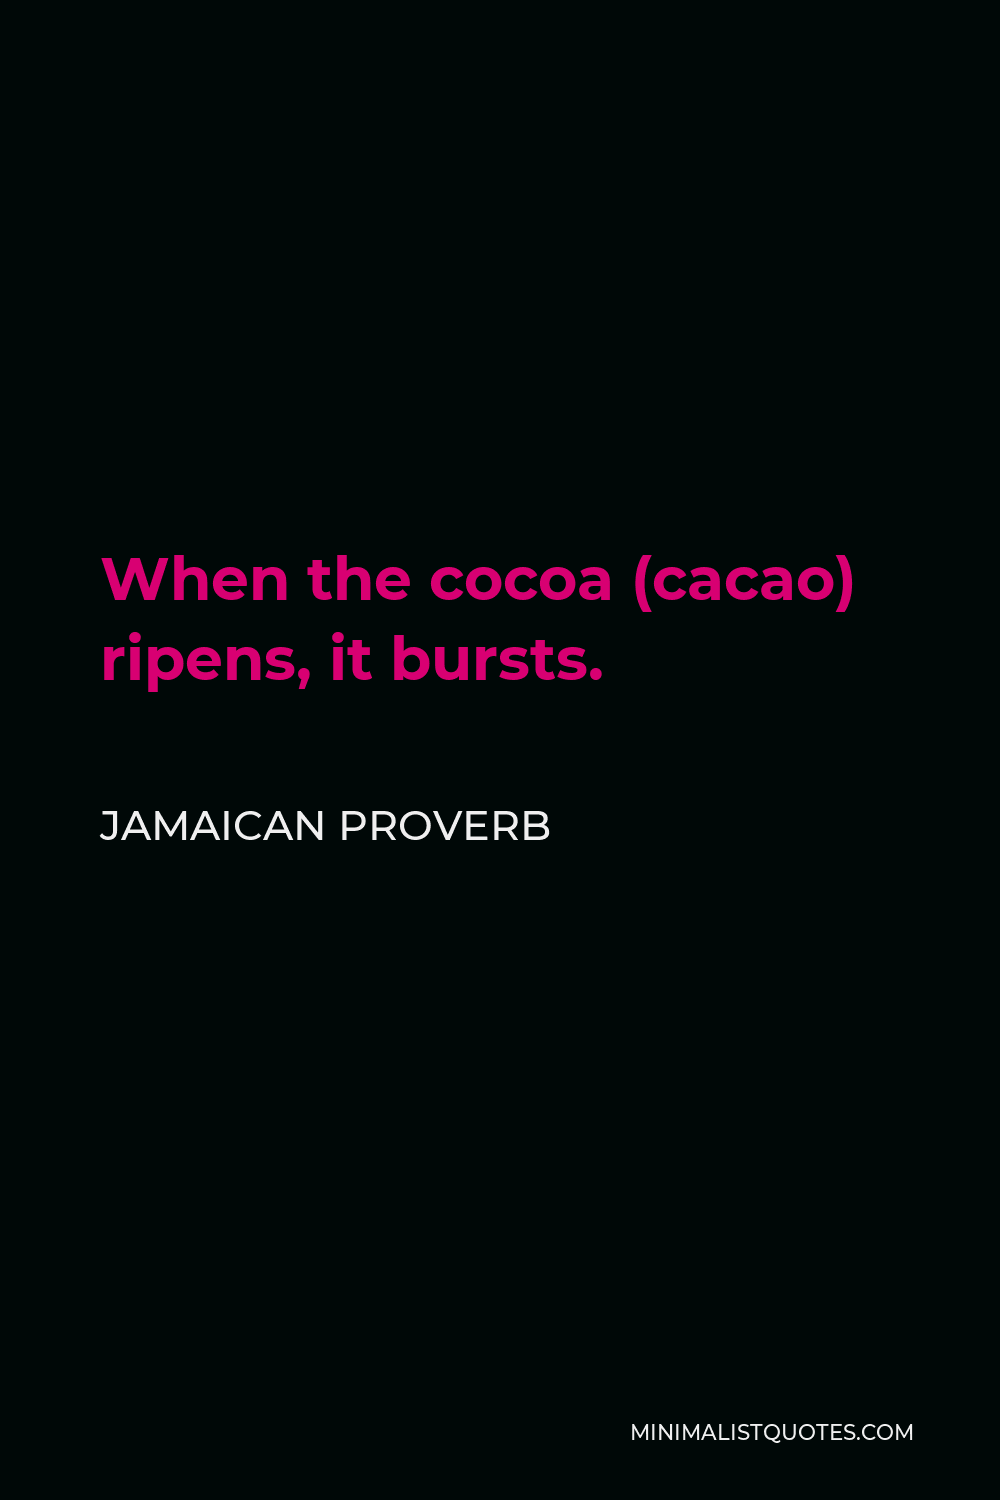 Jamaican Proverb Quote - When the cocoa (cacao) ripens, it bursts.